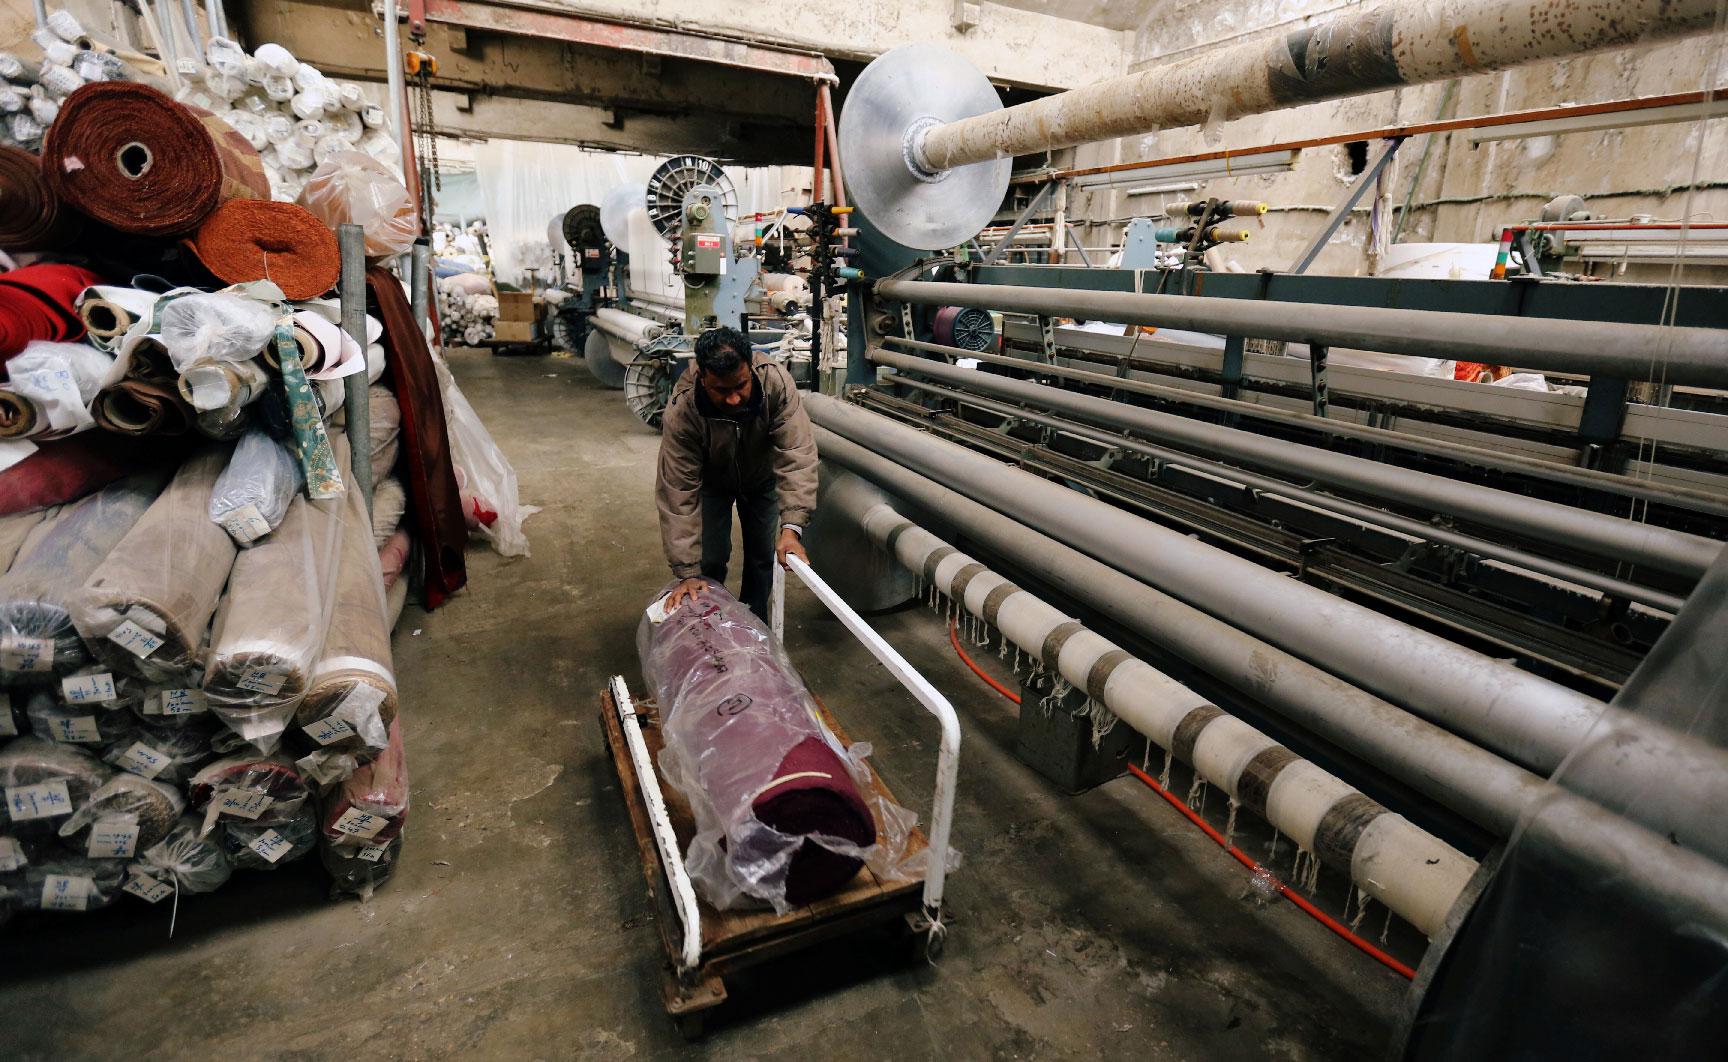 A man pushes a cart at the Mzannar family's fabric factory which has stopped production, in Baabda, Lebanon February 12, 2019.